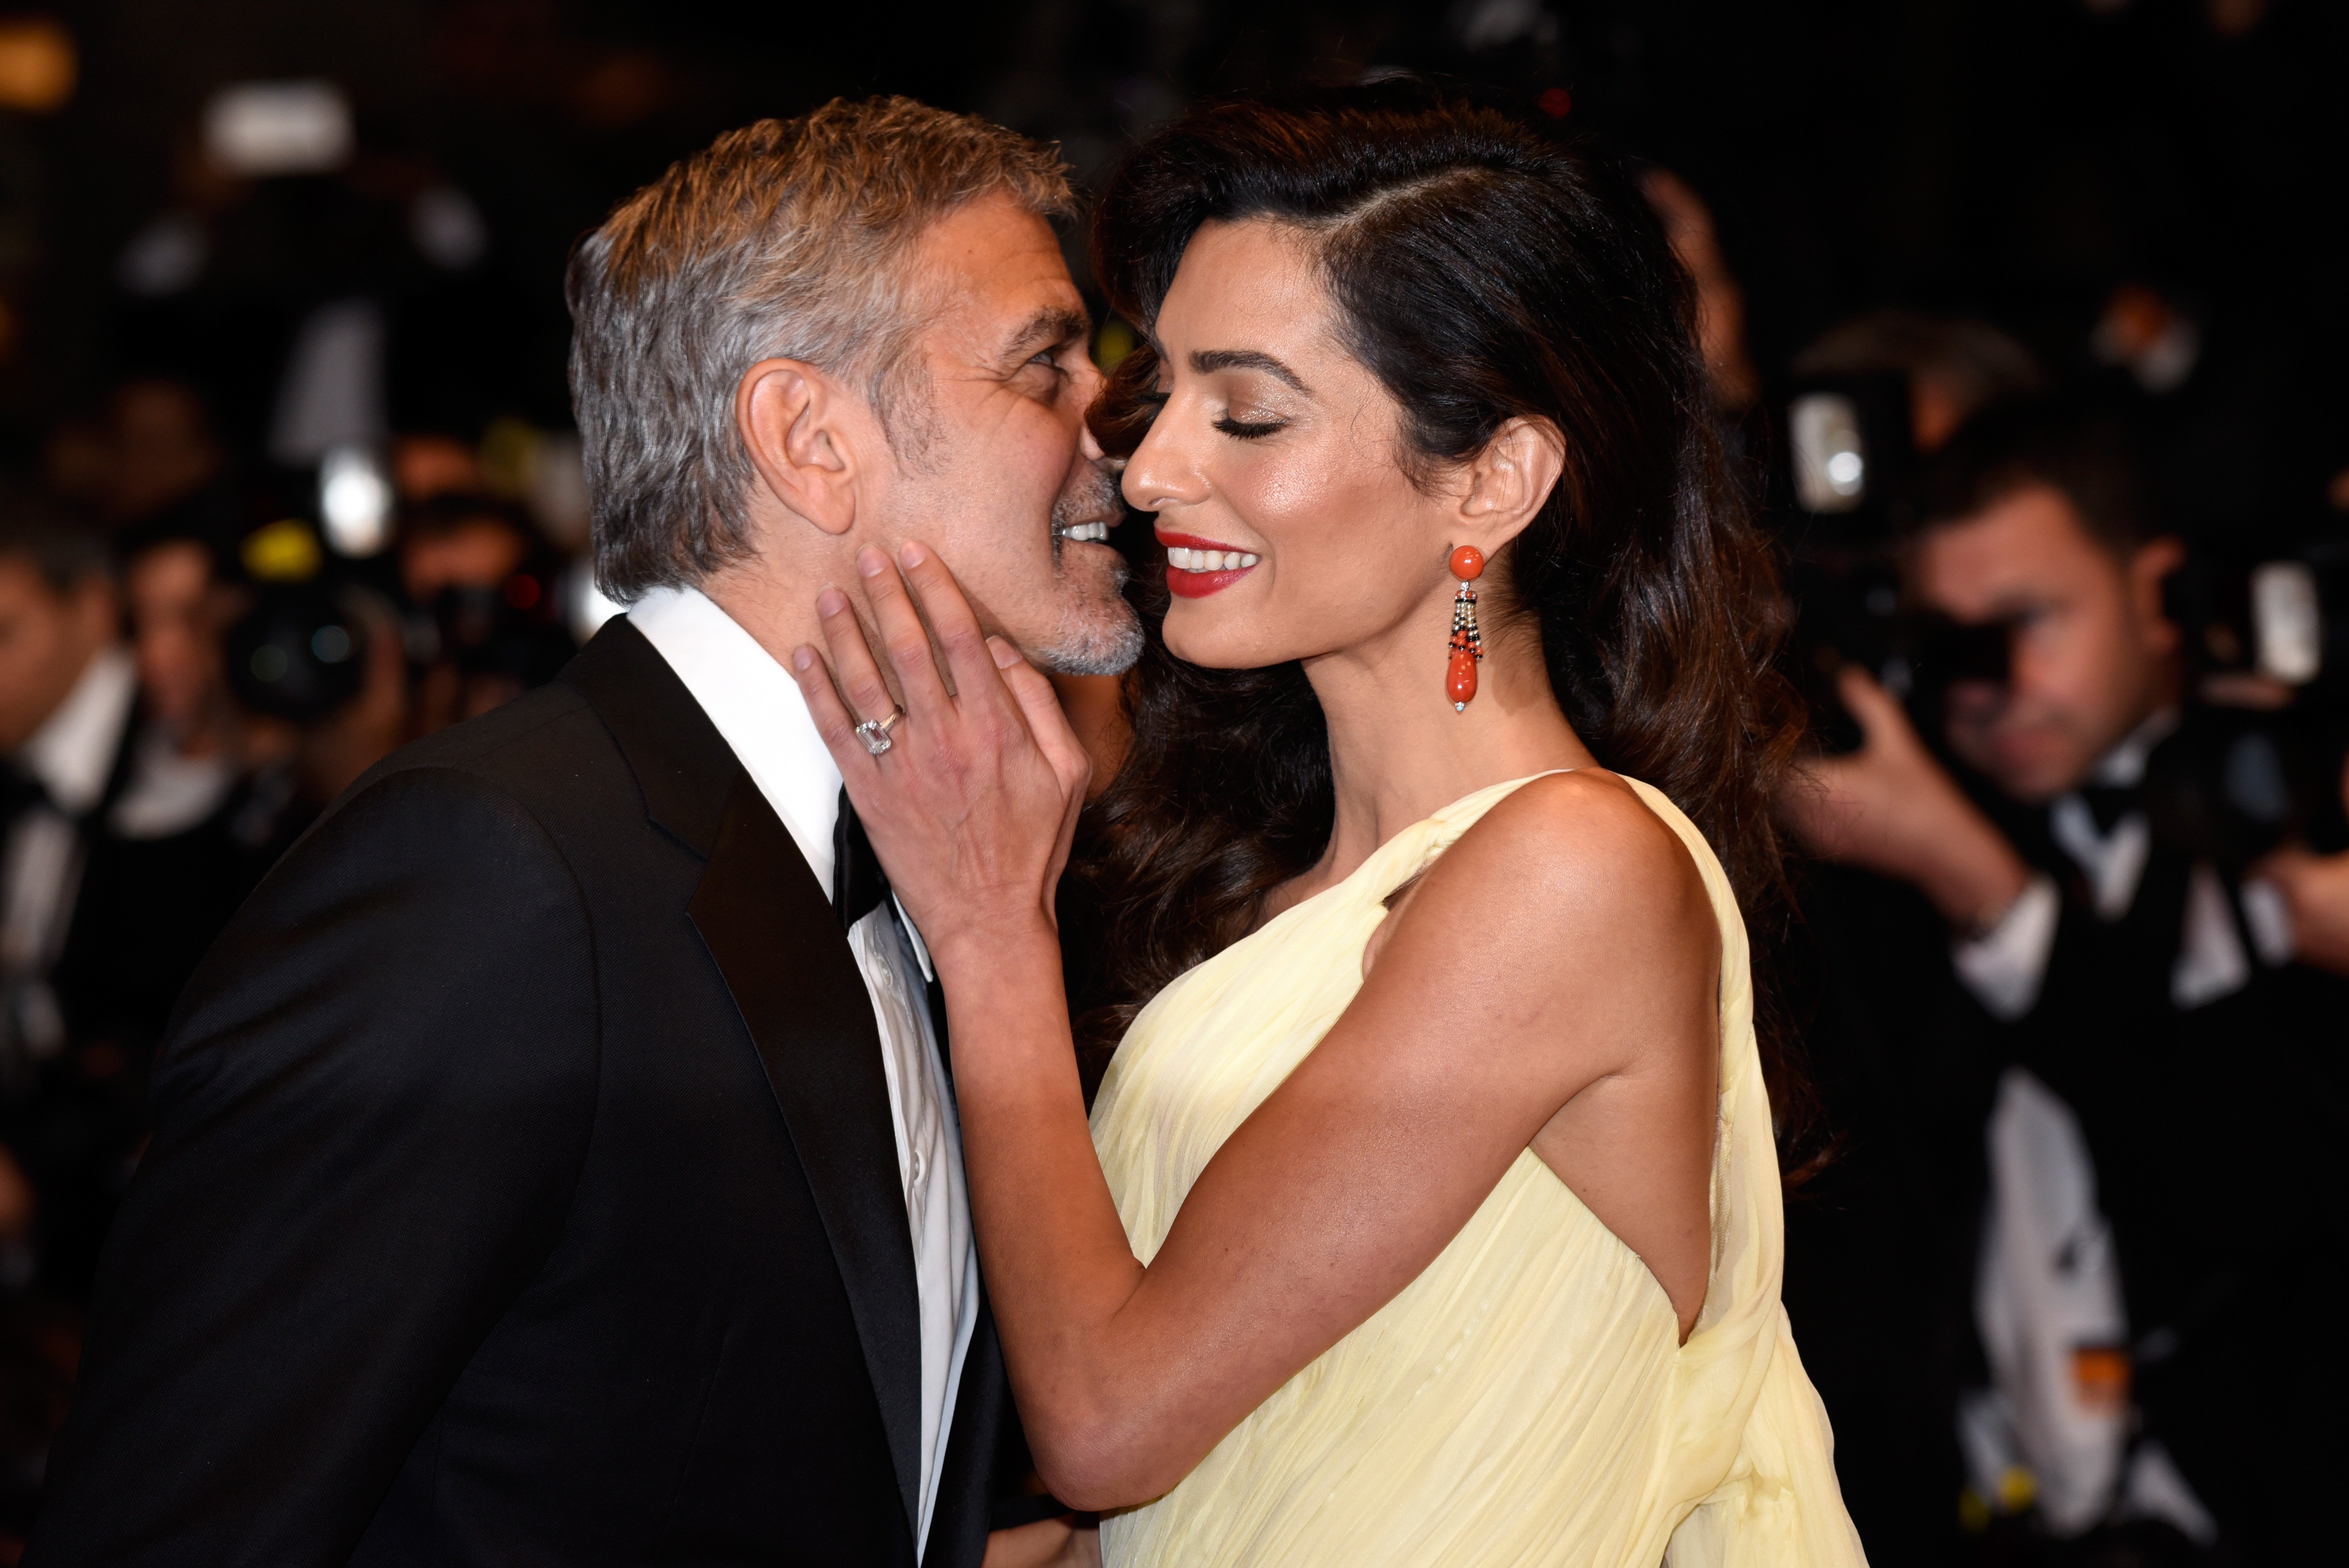 George Clooney and his wife Amal Clooney at the 69th annual Cannes Film Festival at the Palais des Festivals on May 12, 2016 in Cannes, France | Source: Getty Images